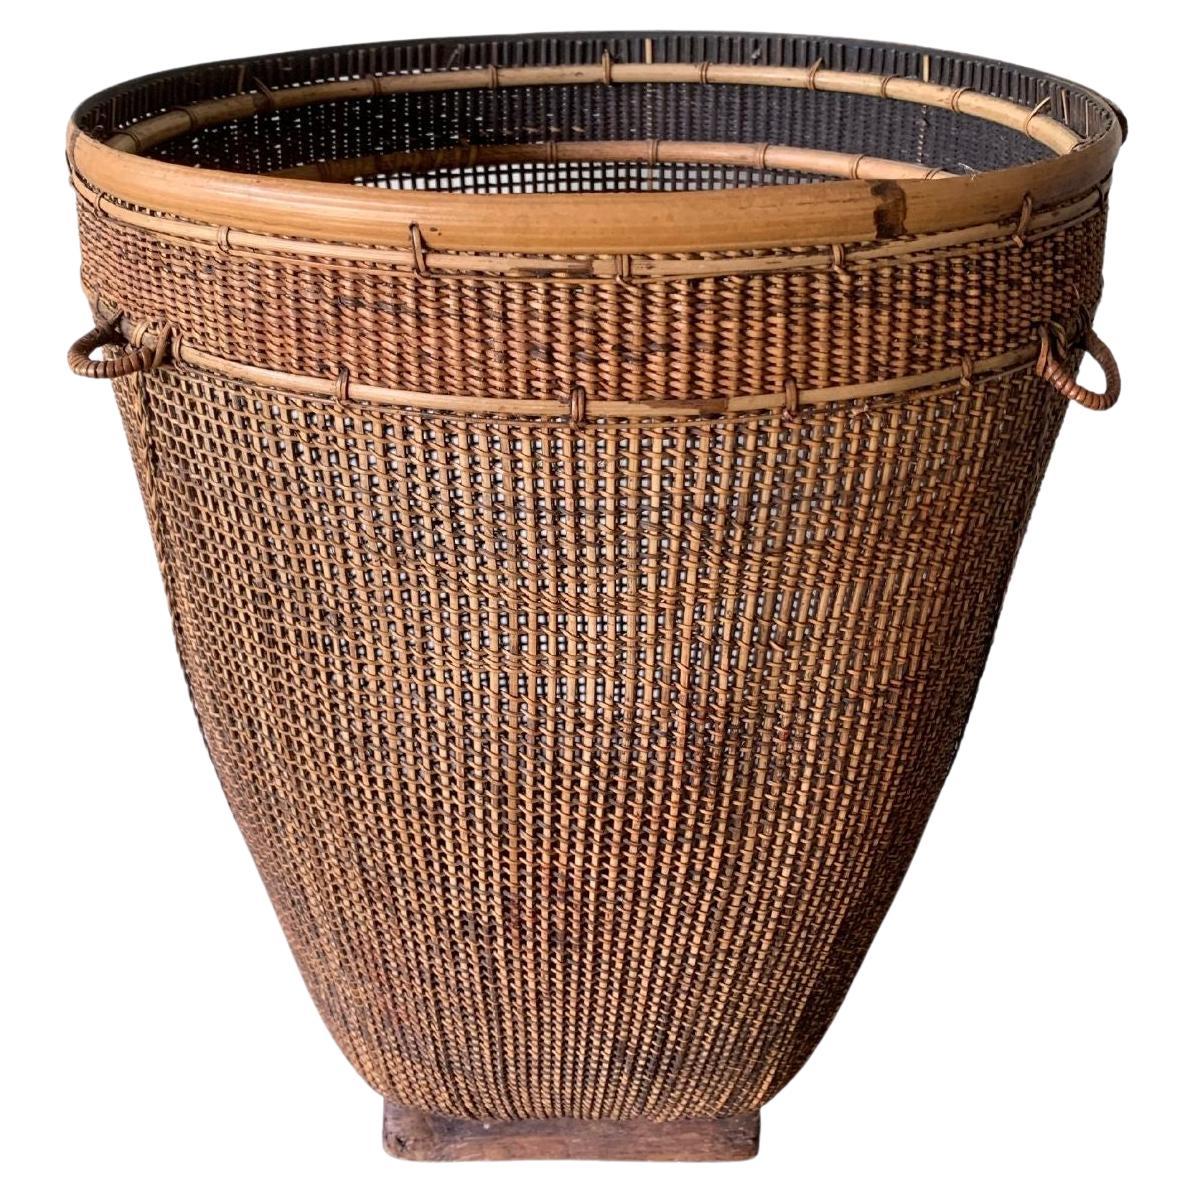 Bamboo & Rattan Basket from Dayak Tribe, Hand-Crafted Borneo, Indonesia, c. 1950